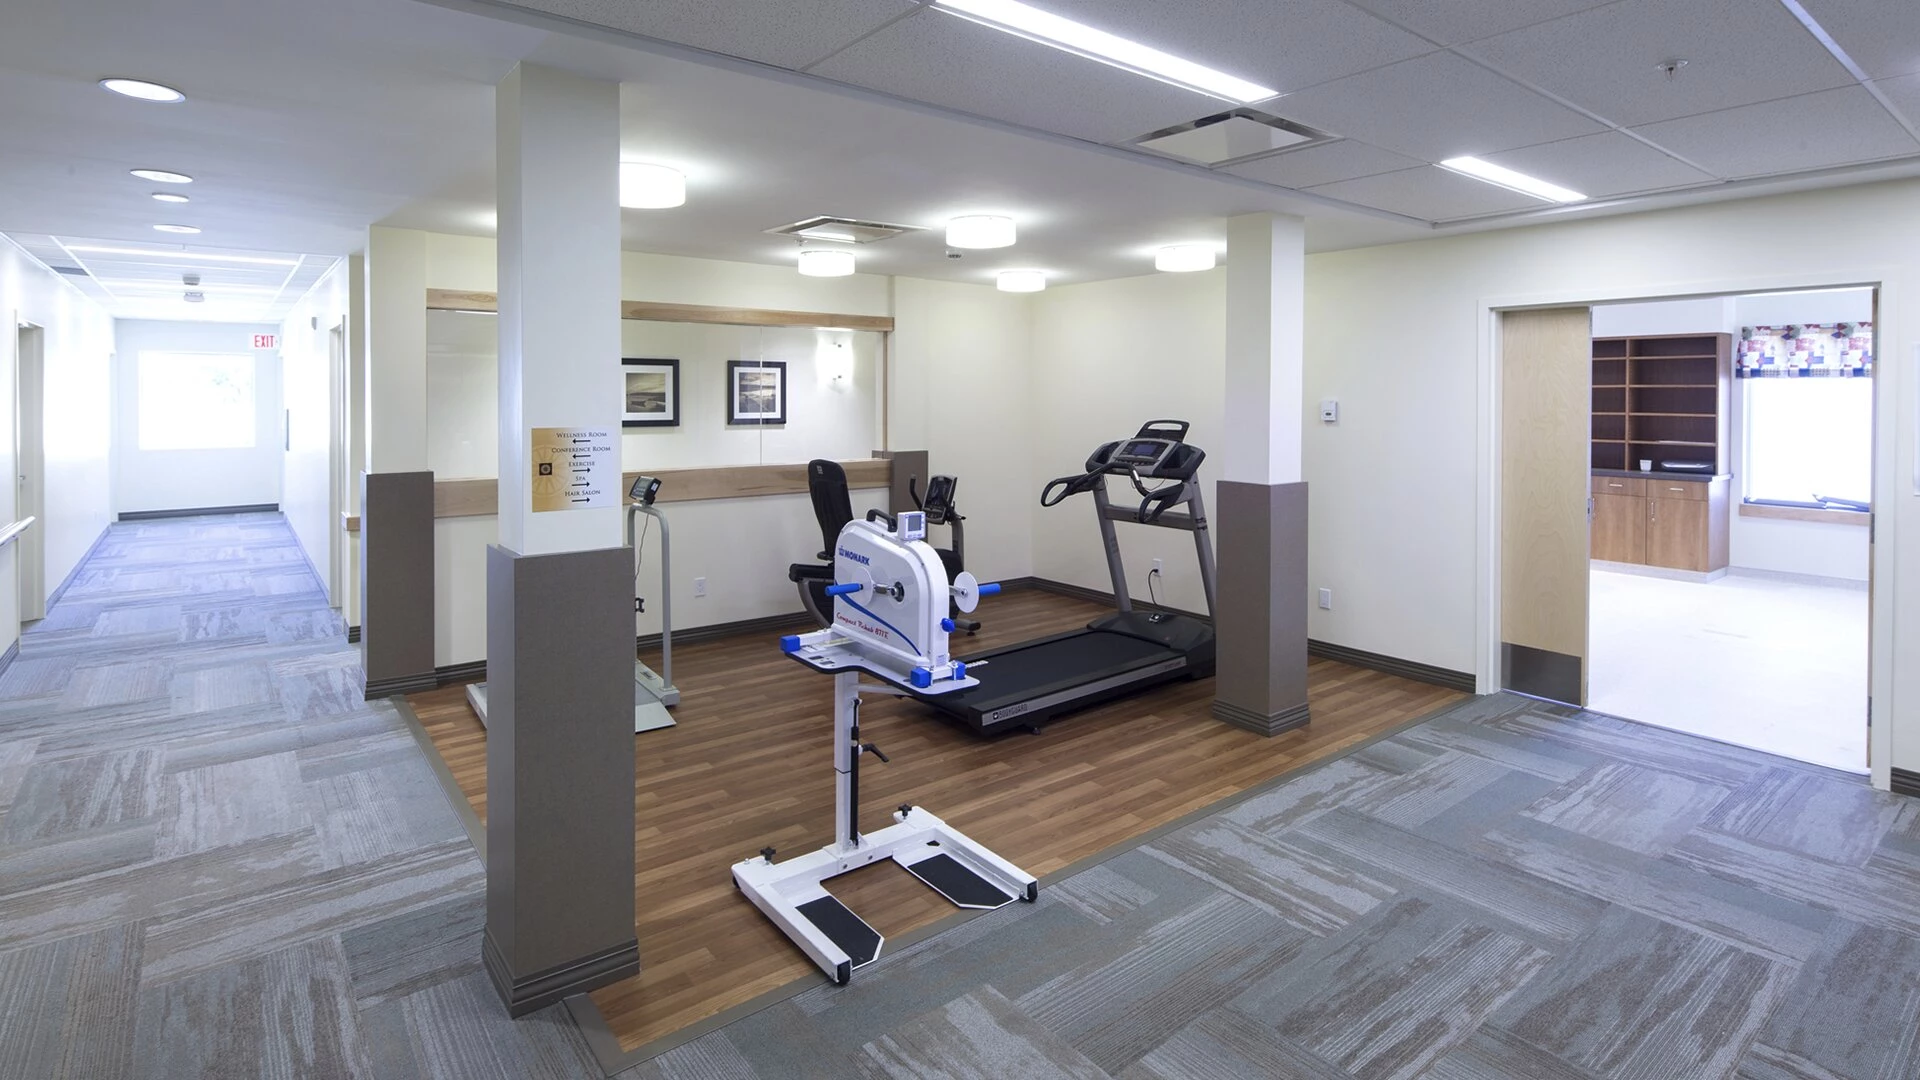 Premium amenities like gym are provided at Sweetgrass